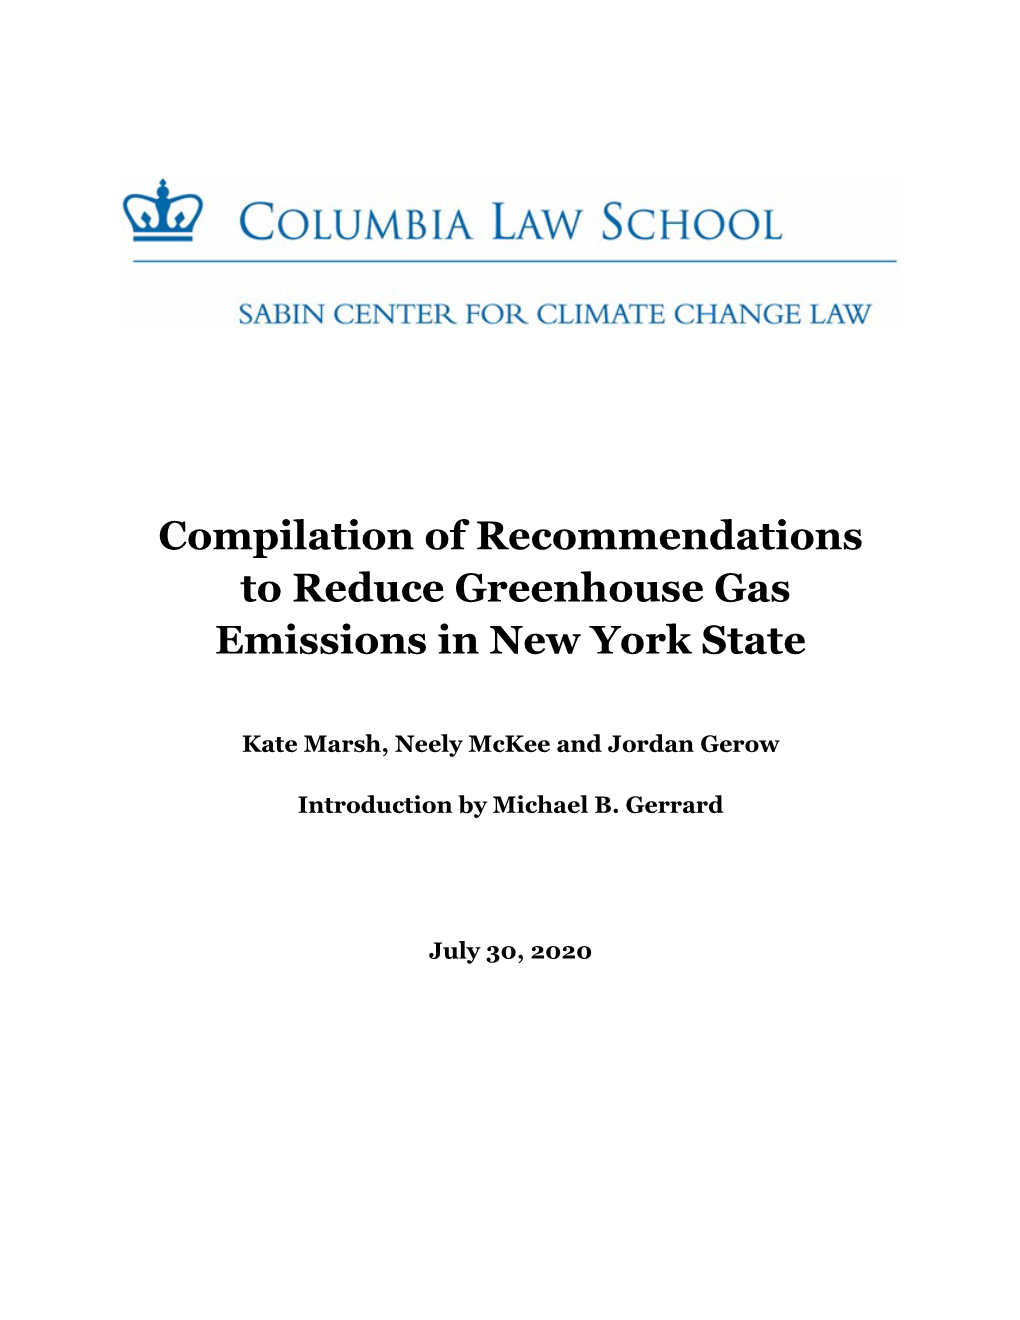 Compilation of Recommendations to Reduce Greenhouse Gas Emissions in New York State